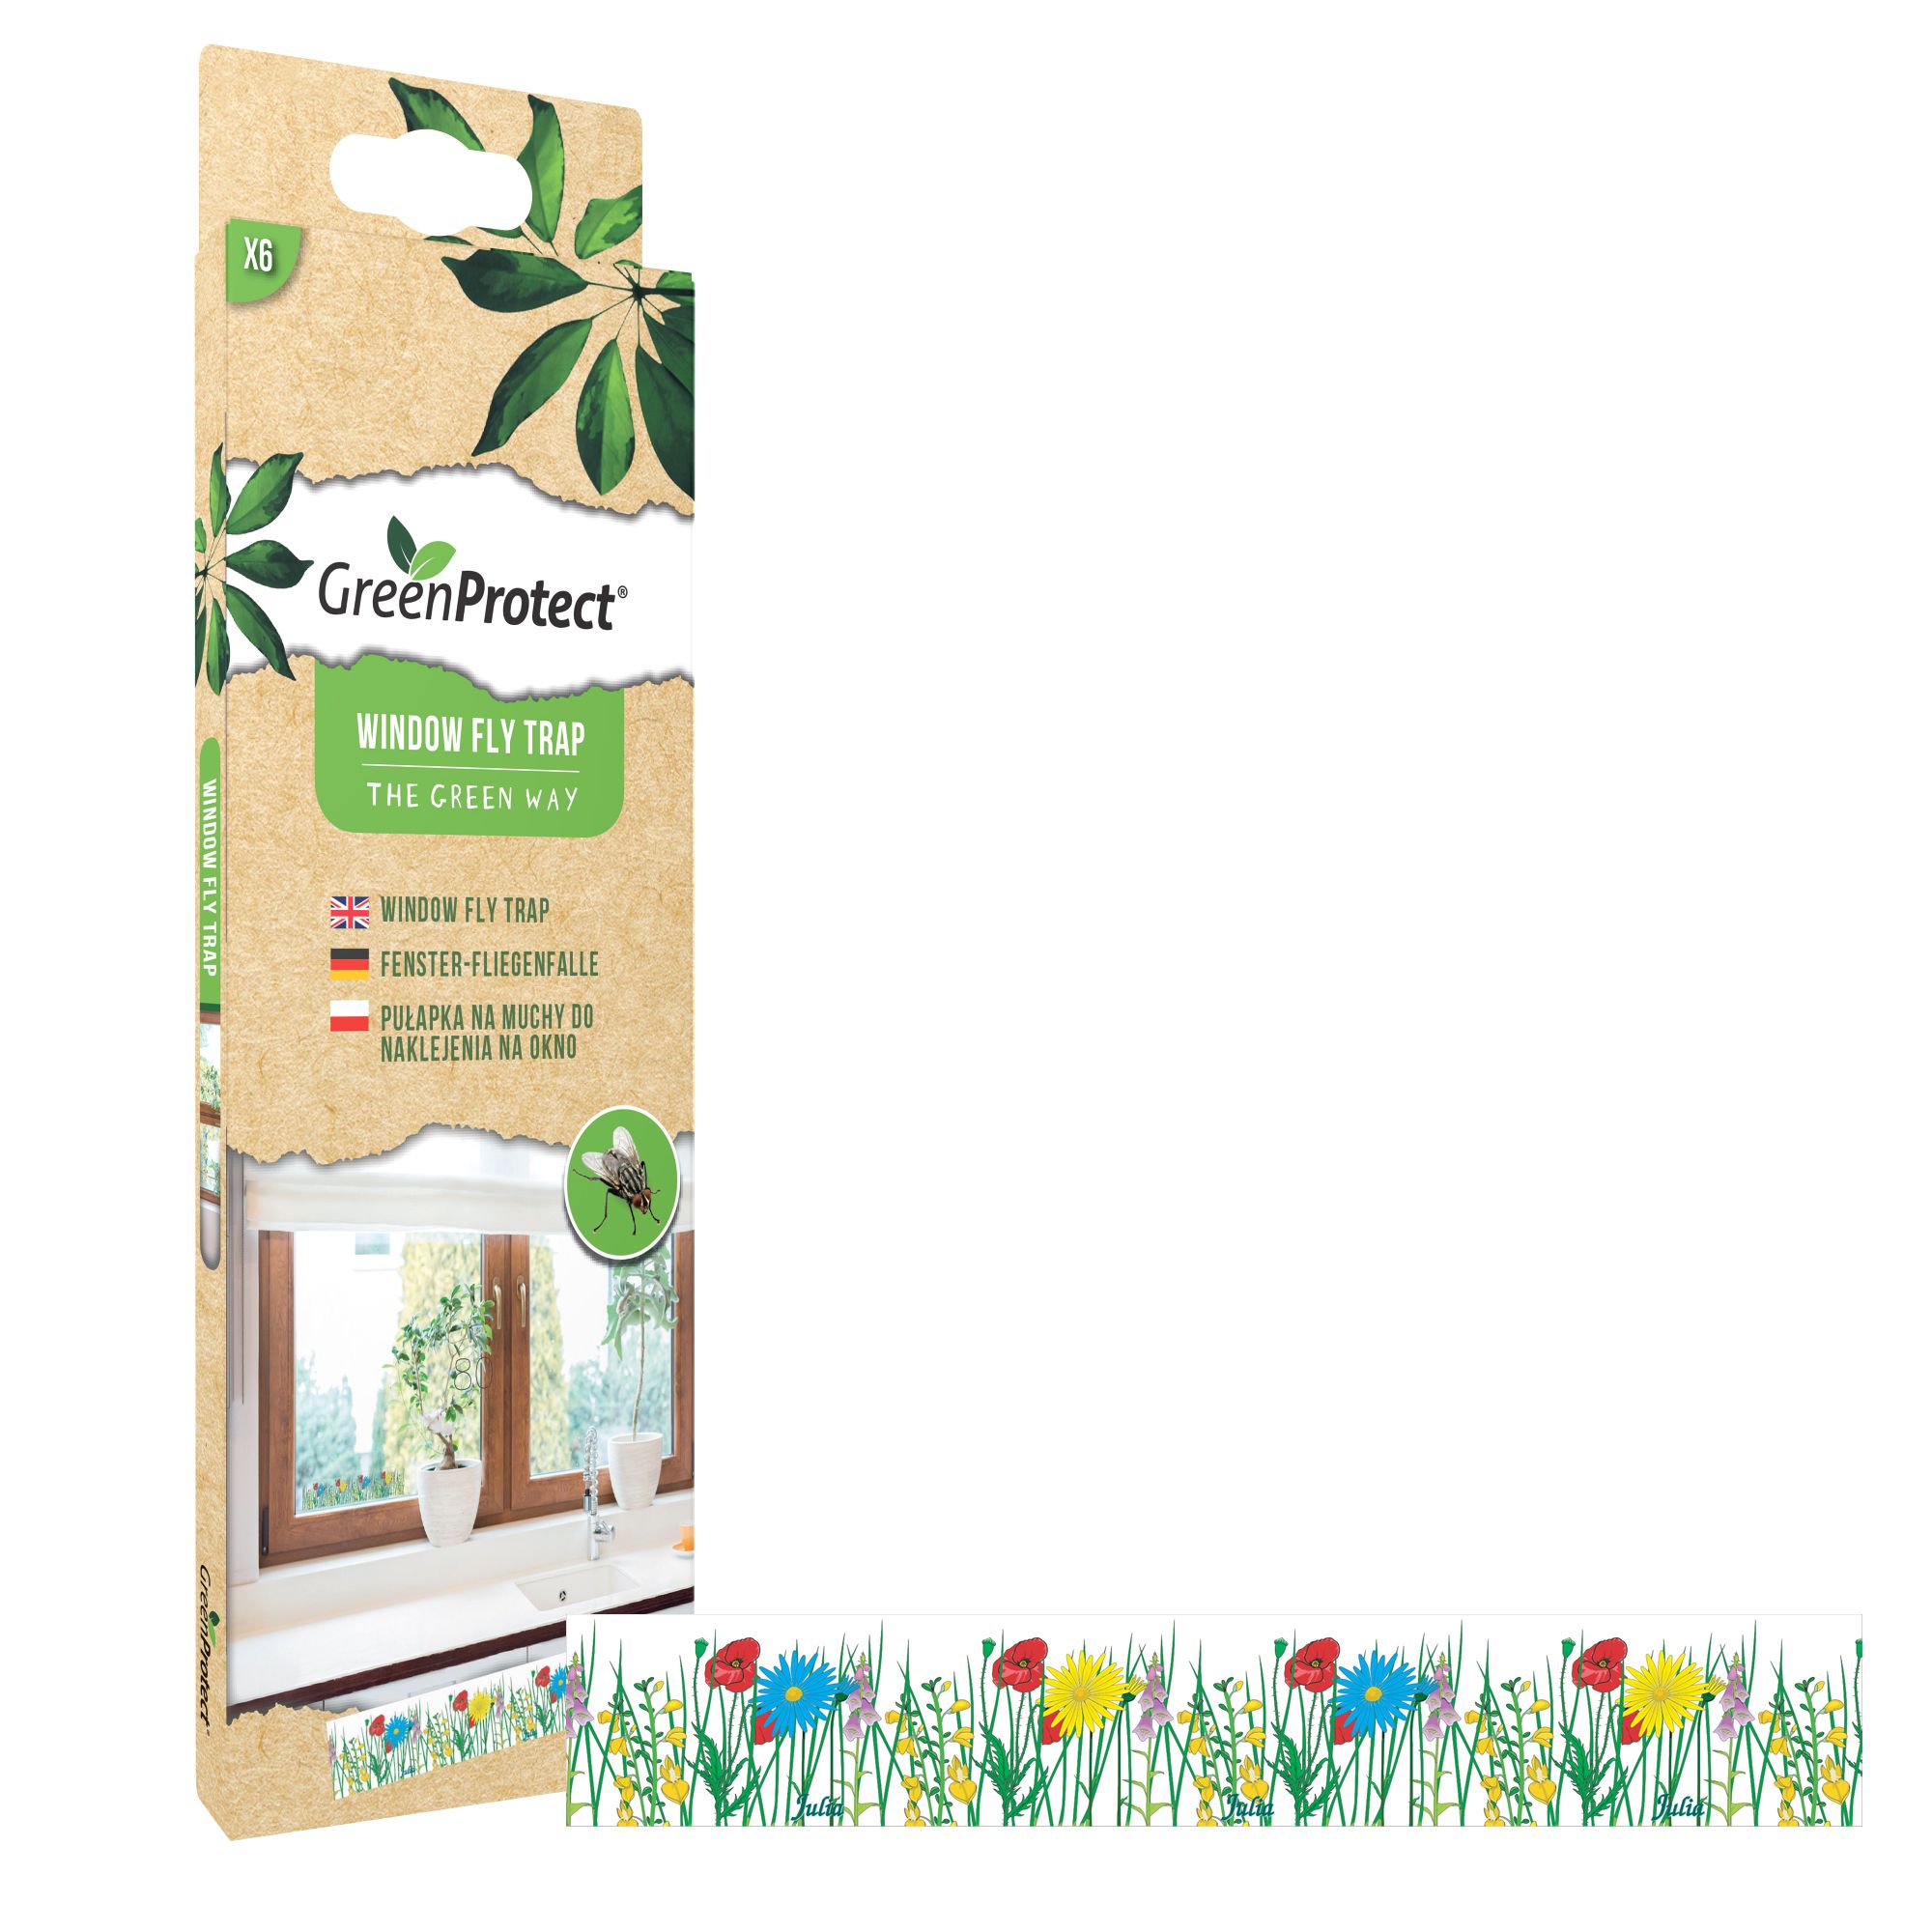 https://kingfisher.scene7.com/is/image/Kingfisher/green-protect-window-fly-trap-pack-of-6~5060525030529_03c_bq?$MOB_PREV$&$width=190&$height=190